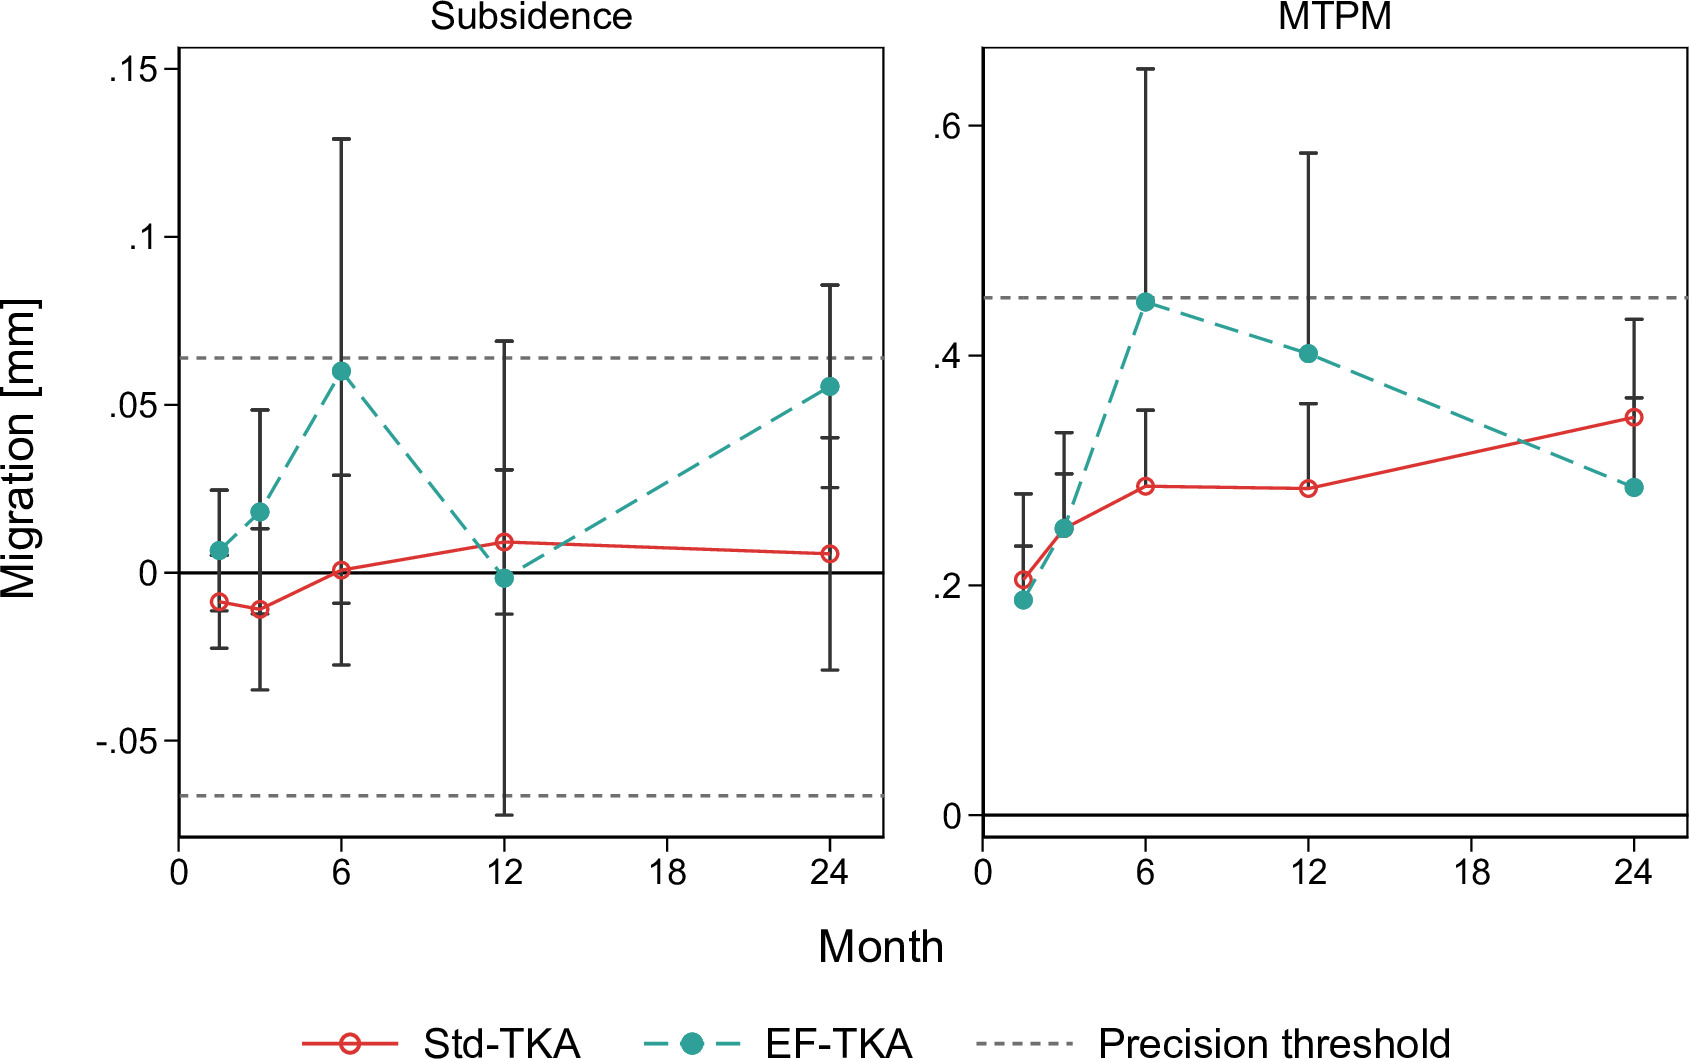 Fig. 2 
          Mean and 95% confidence intervals of the subsidence and maximum total point motion (MTPM) for the standard total knee arthroplasty (Std-TKA) and and enhanced fixation TKA (EF-TKA) tibial component over time. The precision threshold represents the detection limit of the radiostereometric analysis system.
        